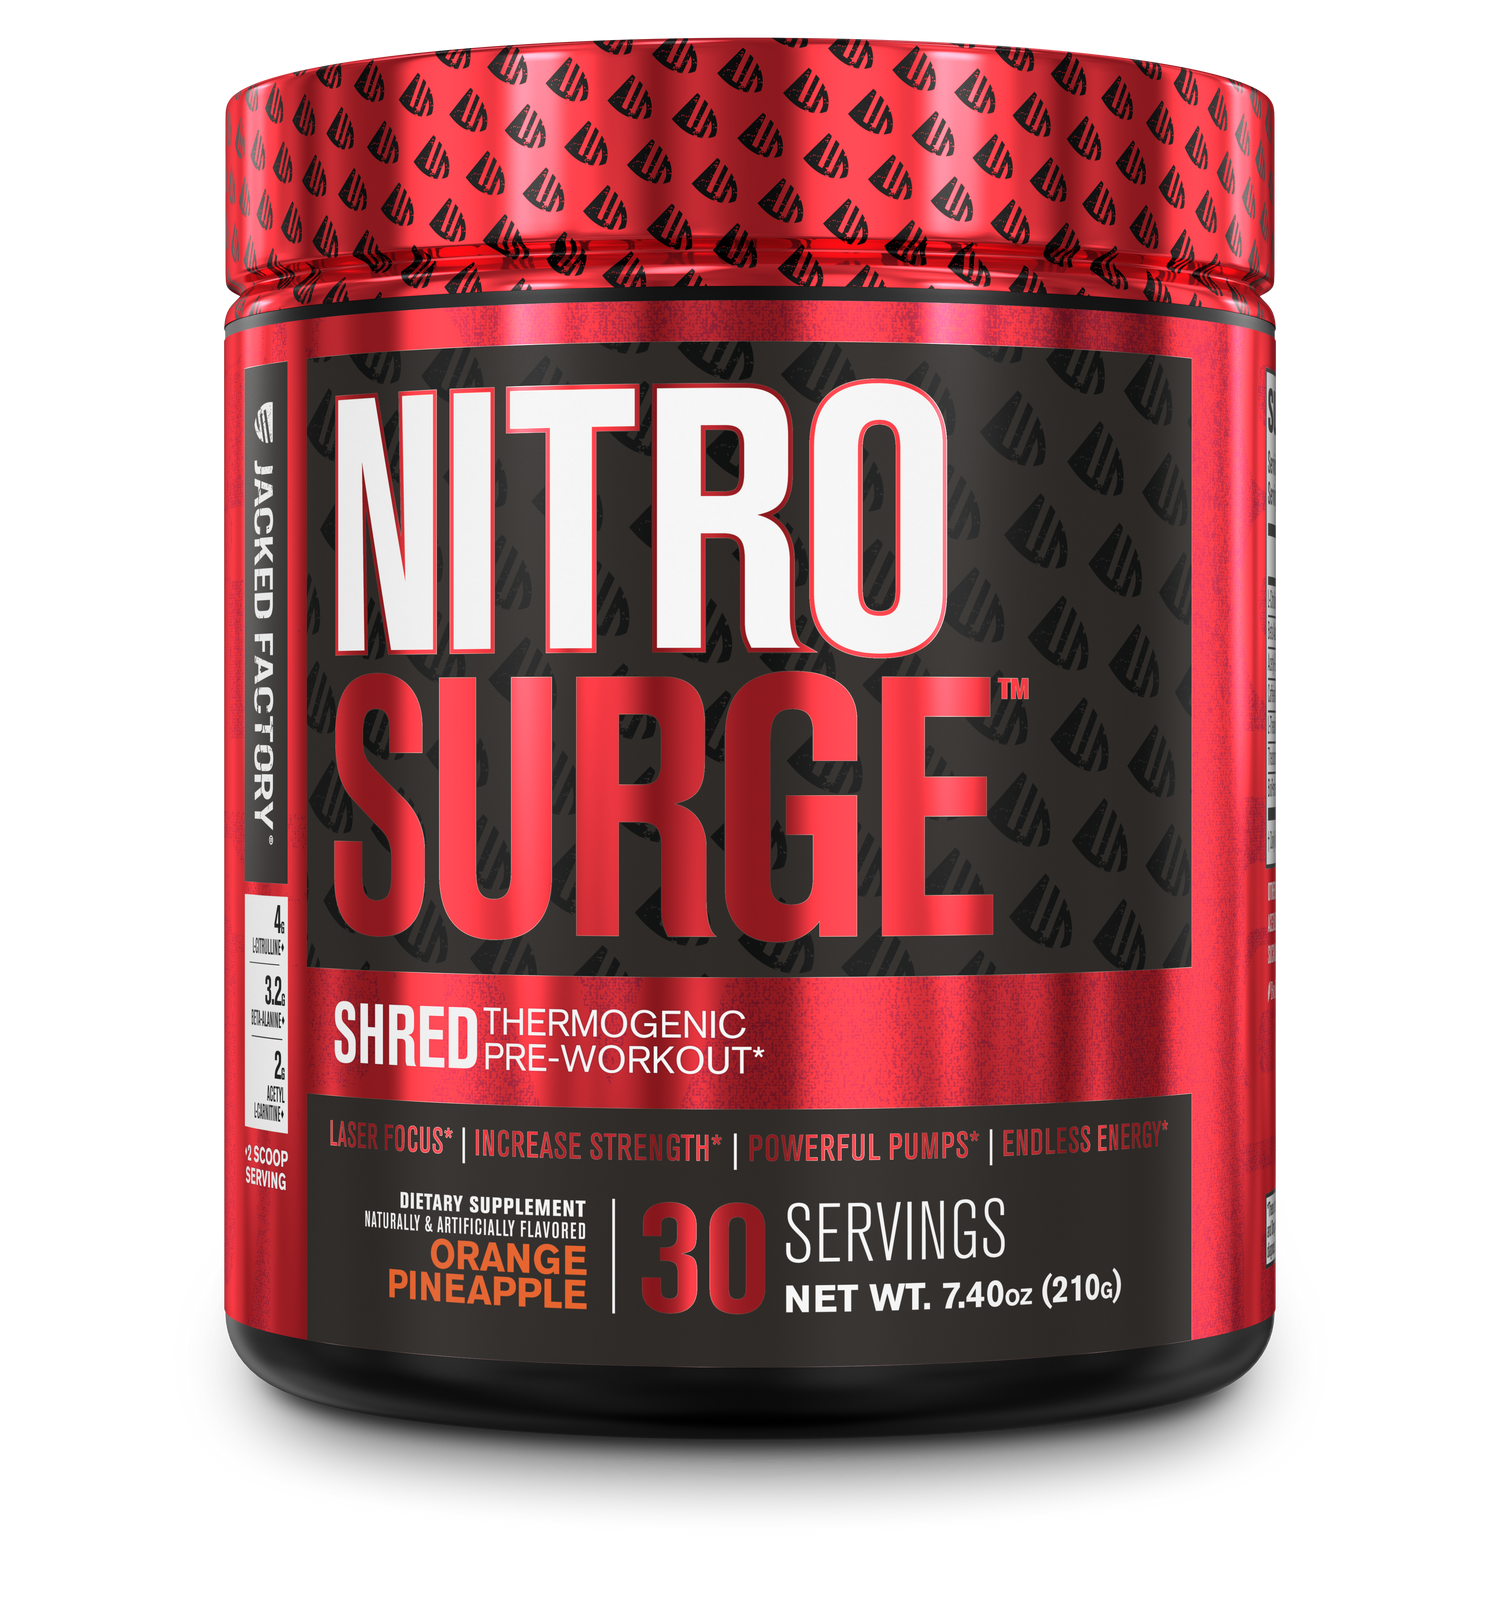 Jacked Factory's Orange Pineapple Nitrosurge Shred (30 servings) in a black bottle with red label